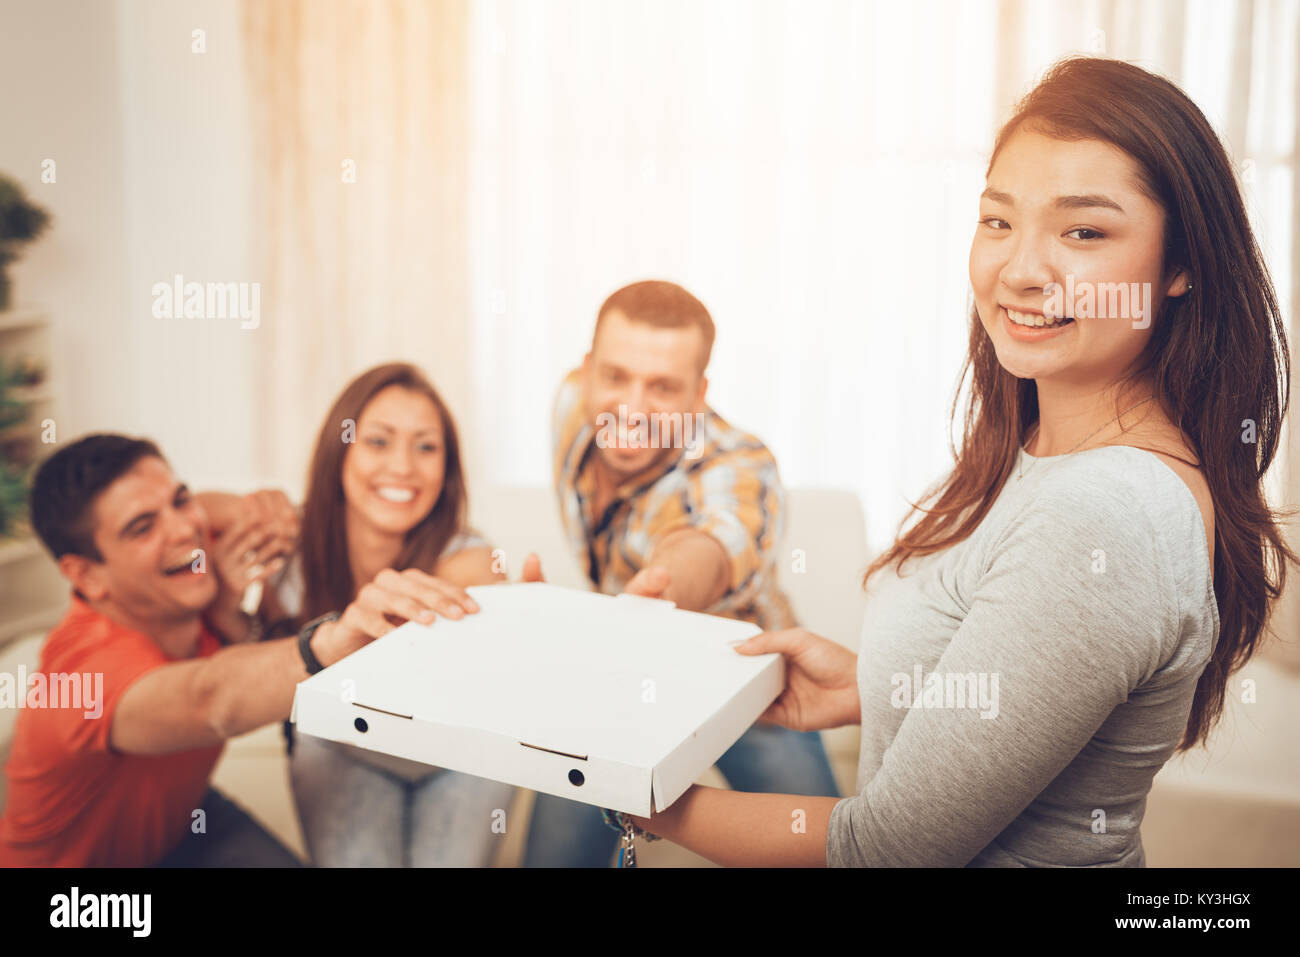 Four cheerful friends enjoying pizza together at home party. Selective focus. Focus on foreground, on Japanese girl. She is holding box with pizza and Stock Photo